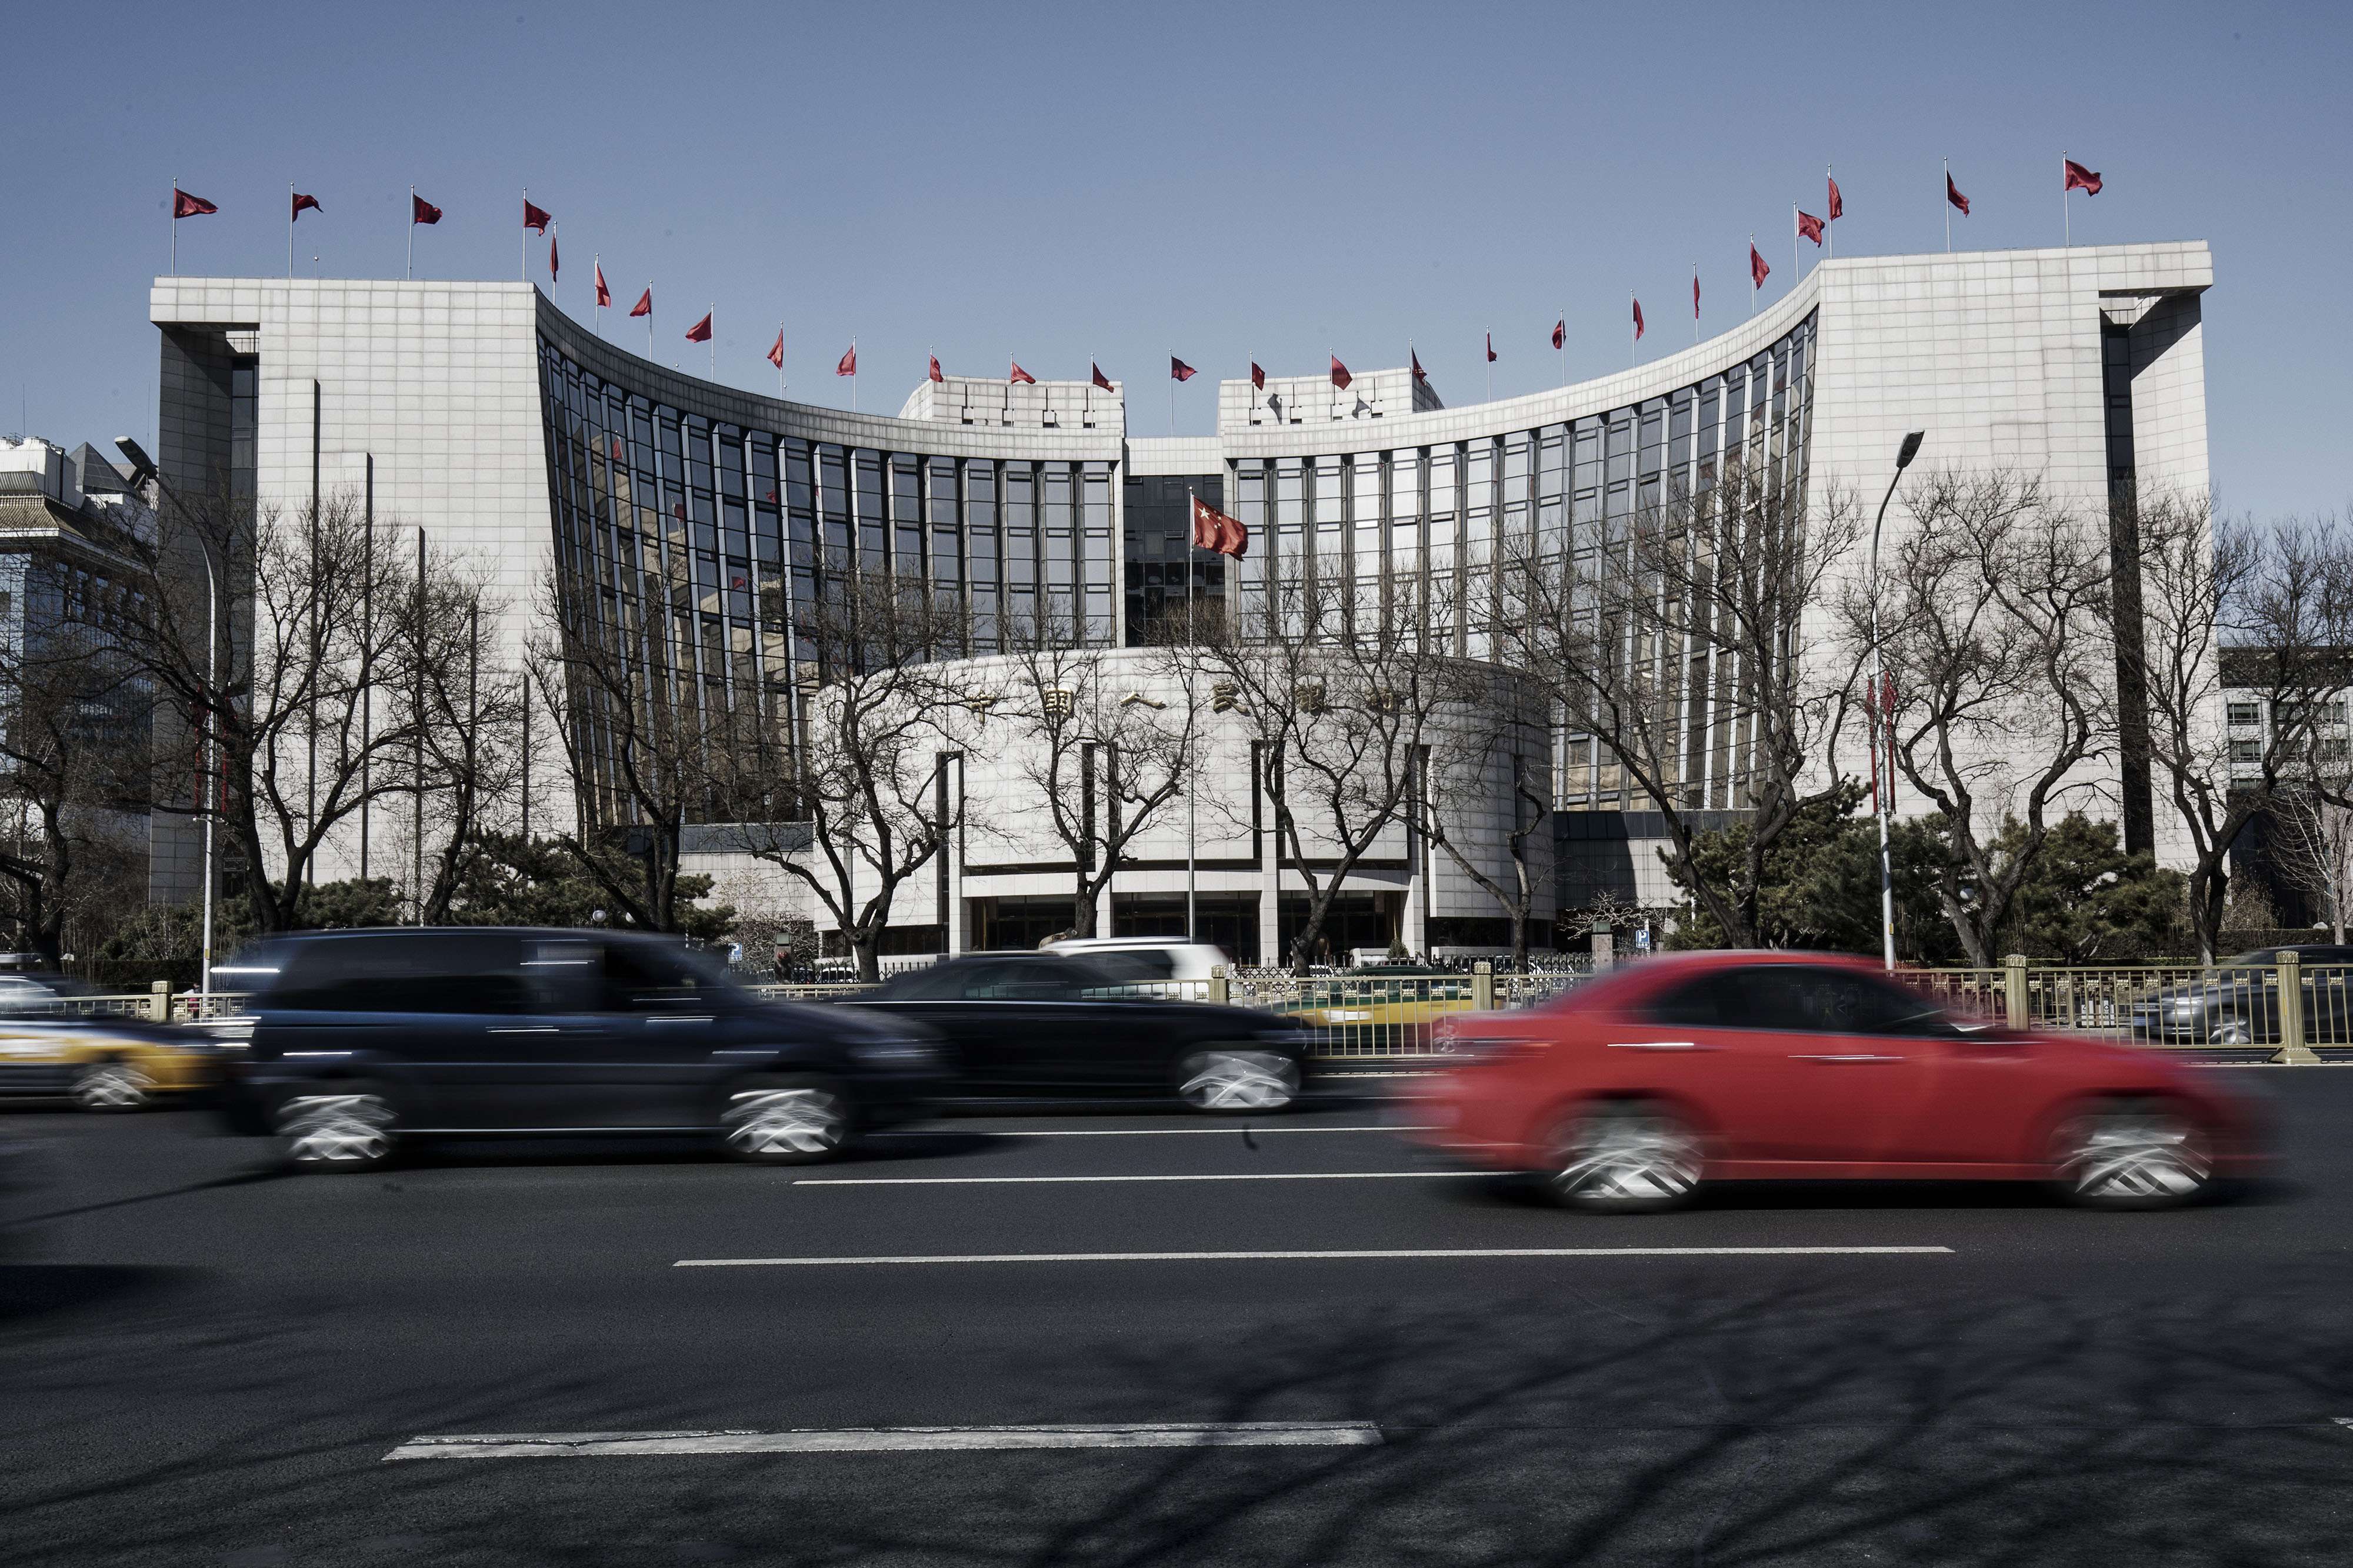 The People’s Bank of China headquarters in Beijing. The central bank is drafting an umbrella regulation to look after the country’s 60 trillion yuan asset management business.Photo: Bloomberg